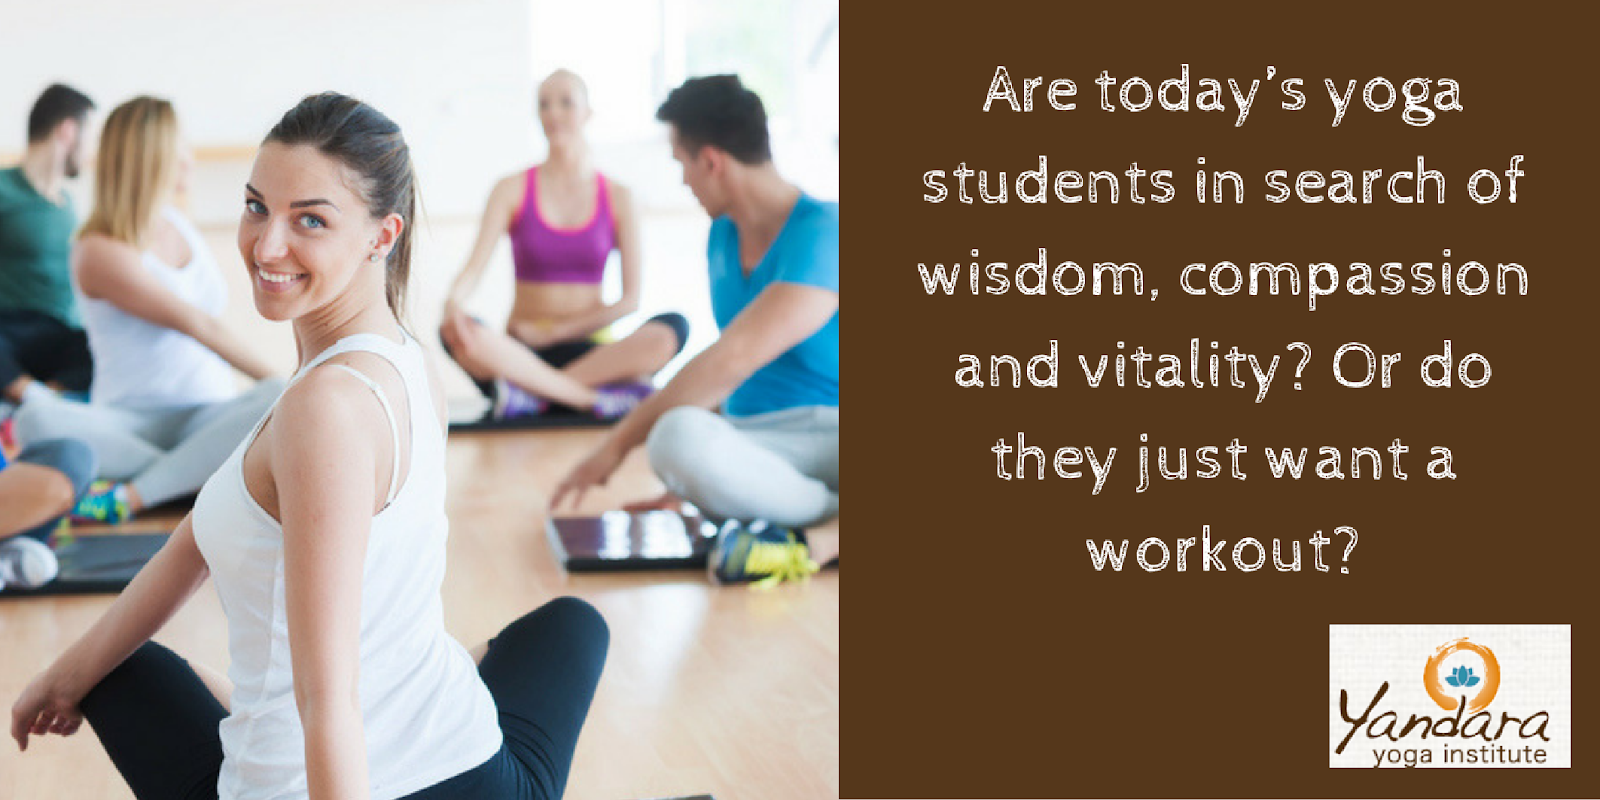 What does today's yoga student want?